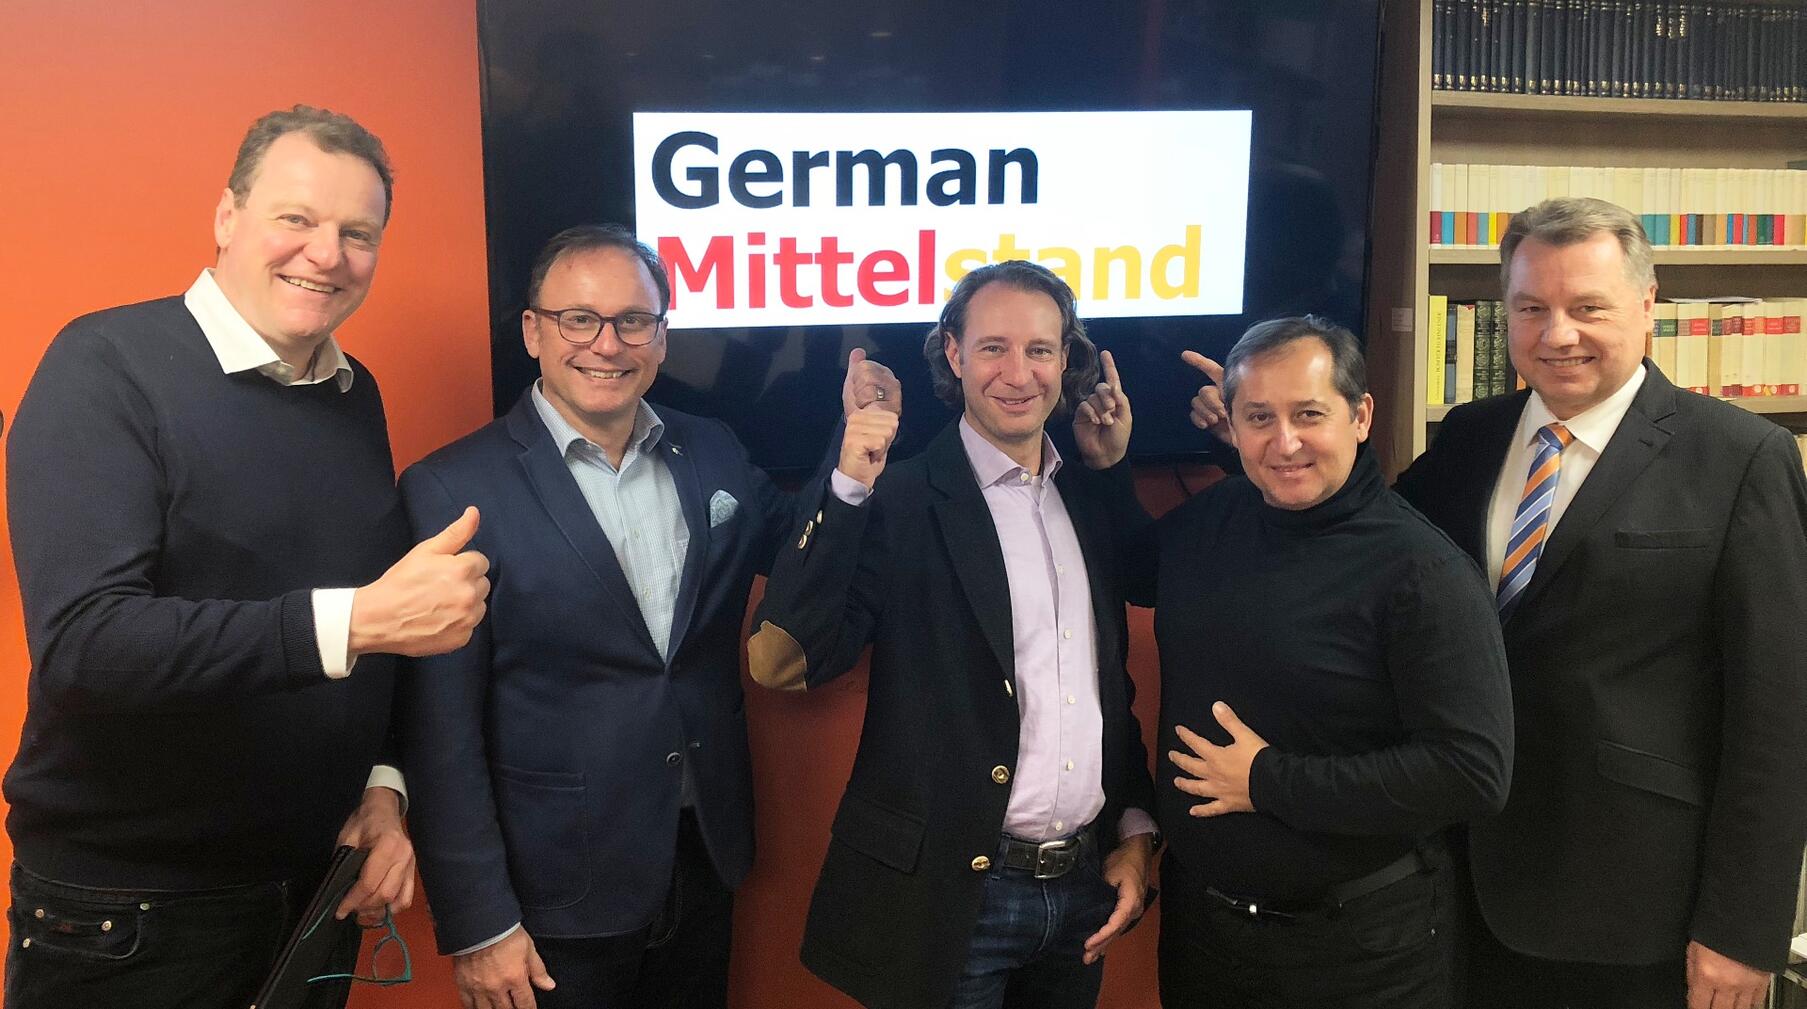 We go for it. Founding of German Mittelstand Network